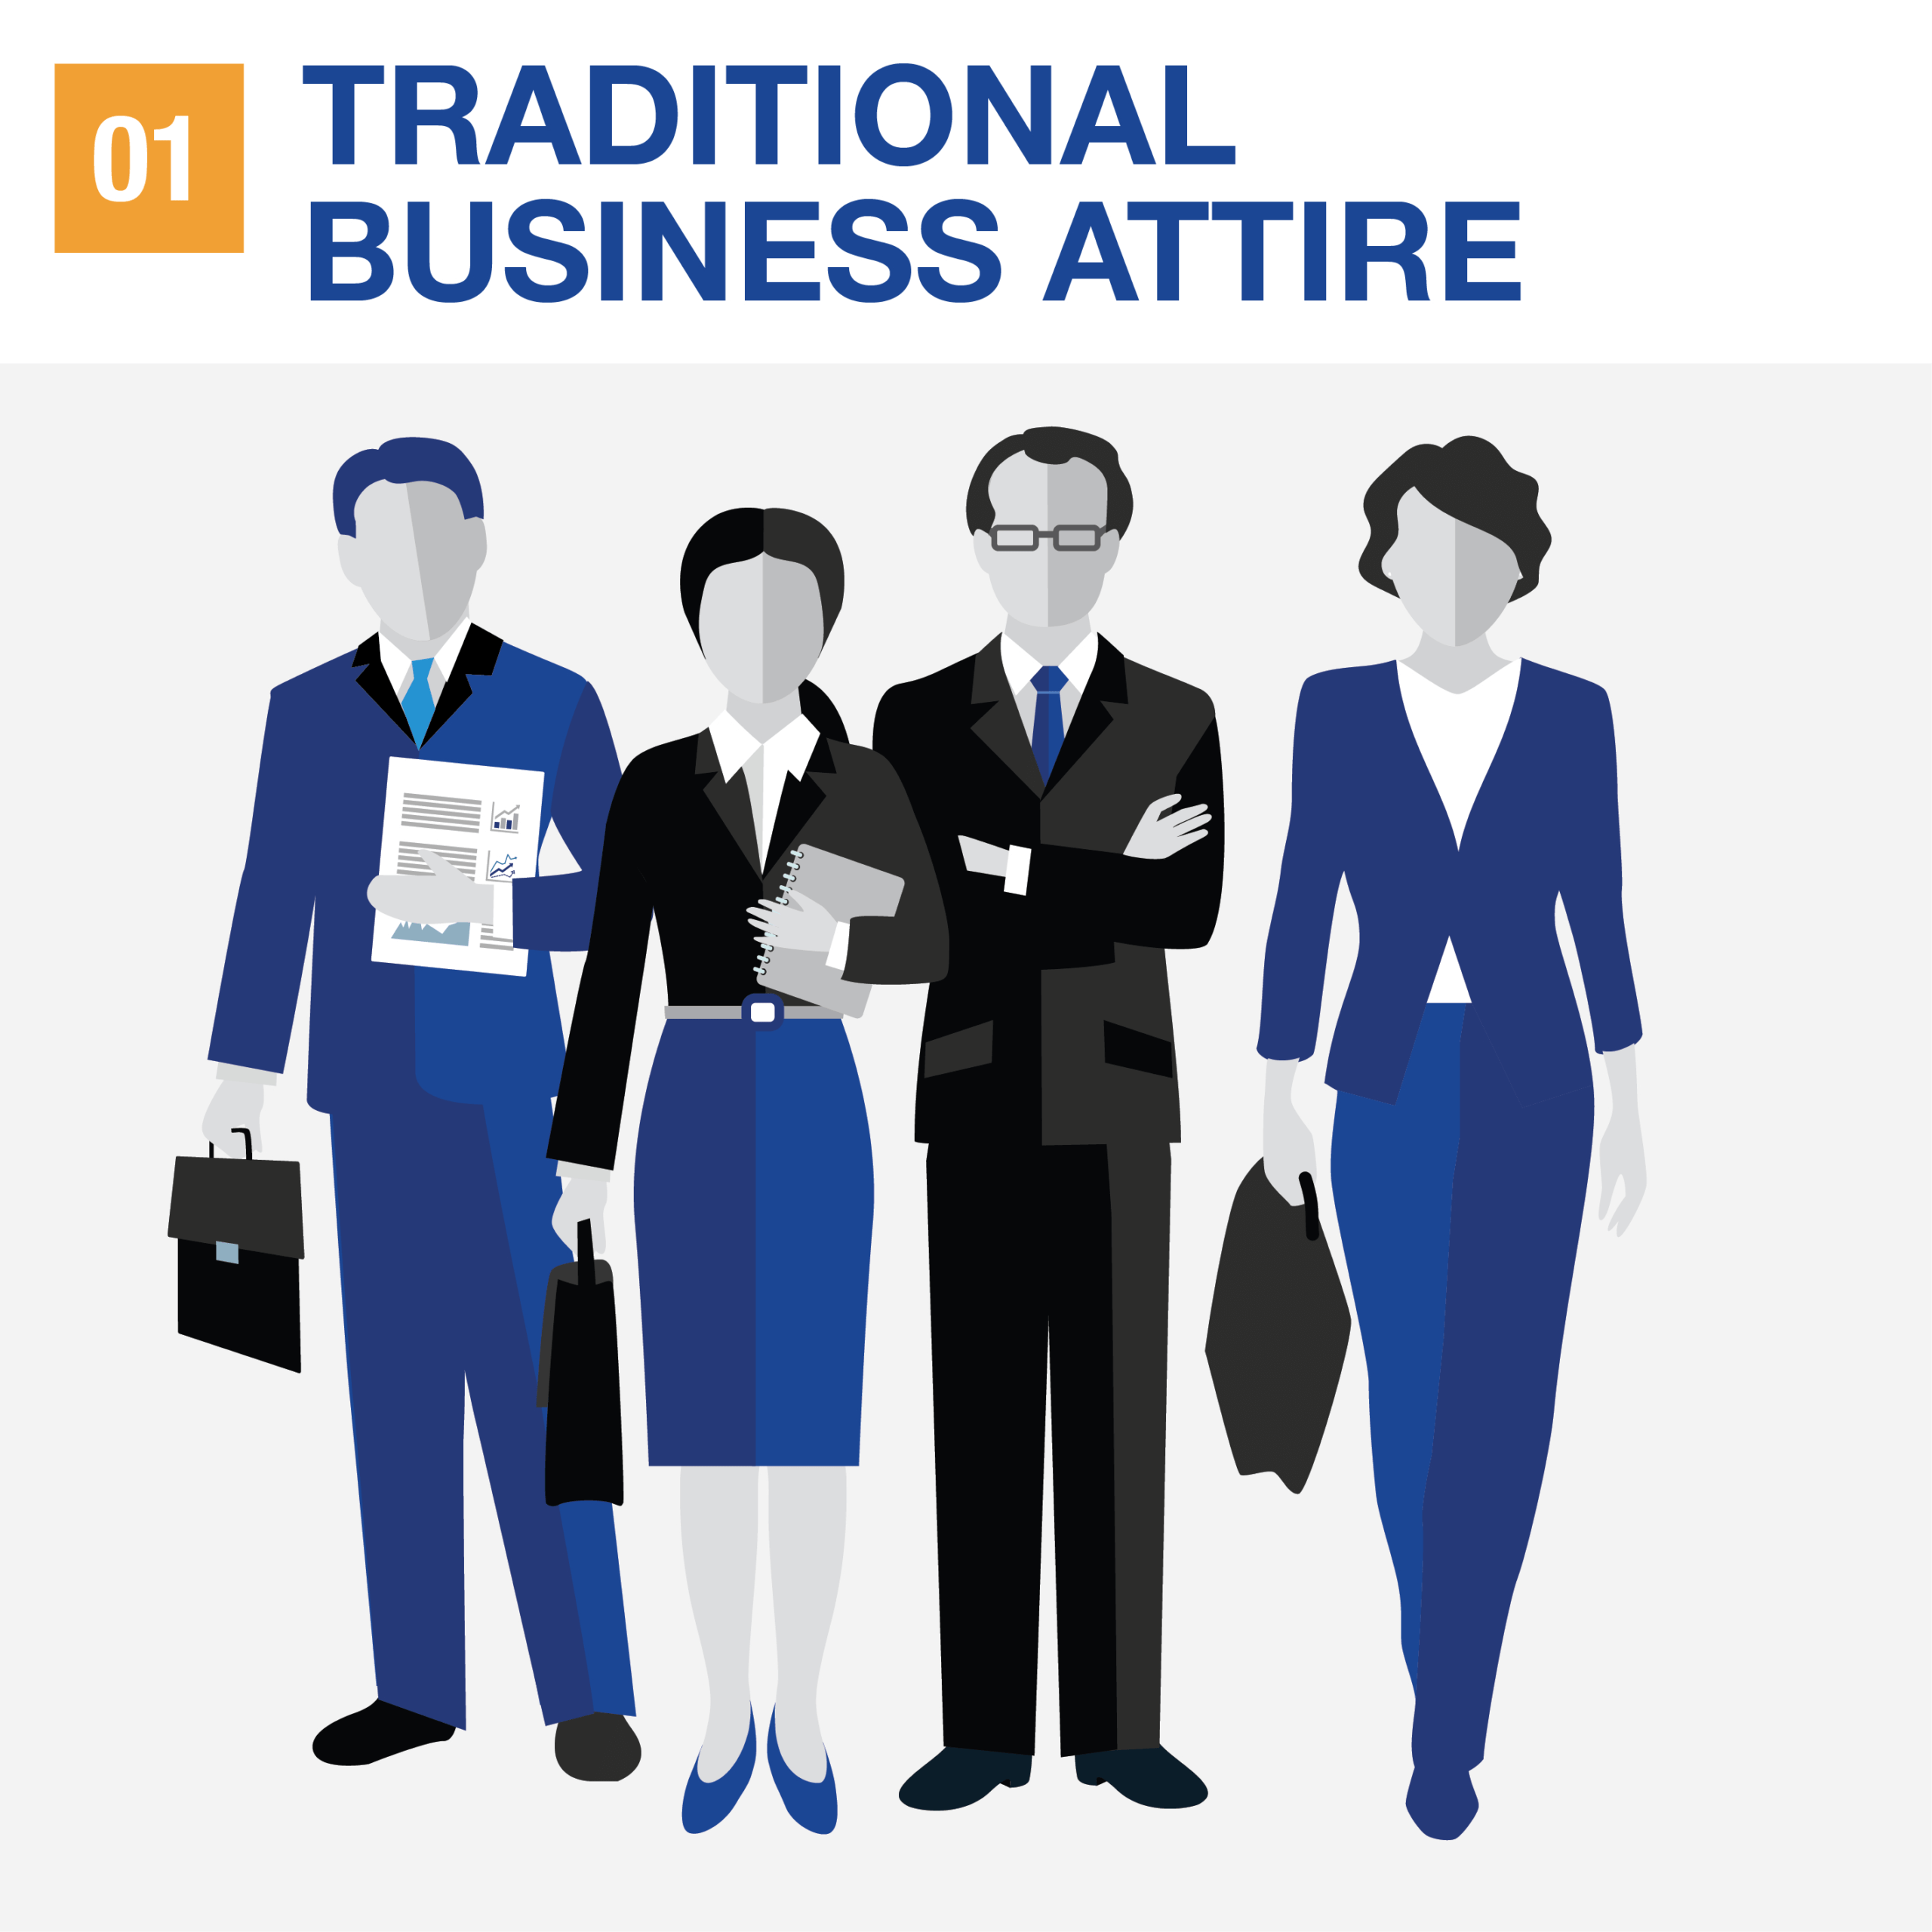 Your Guide To The Different Types Of Business Attire With Business Attire For Women Template